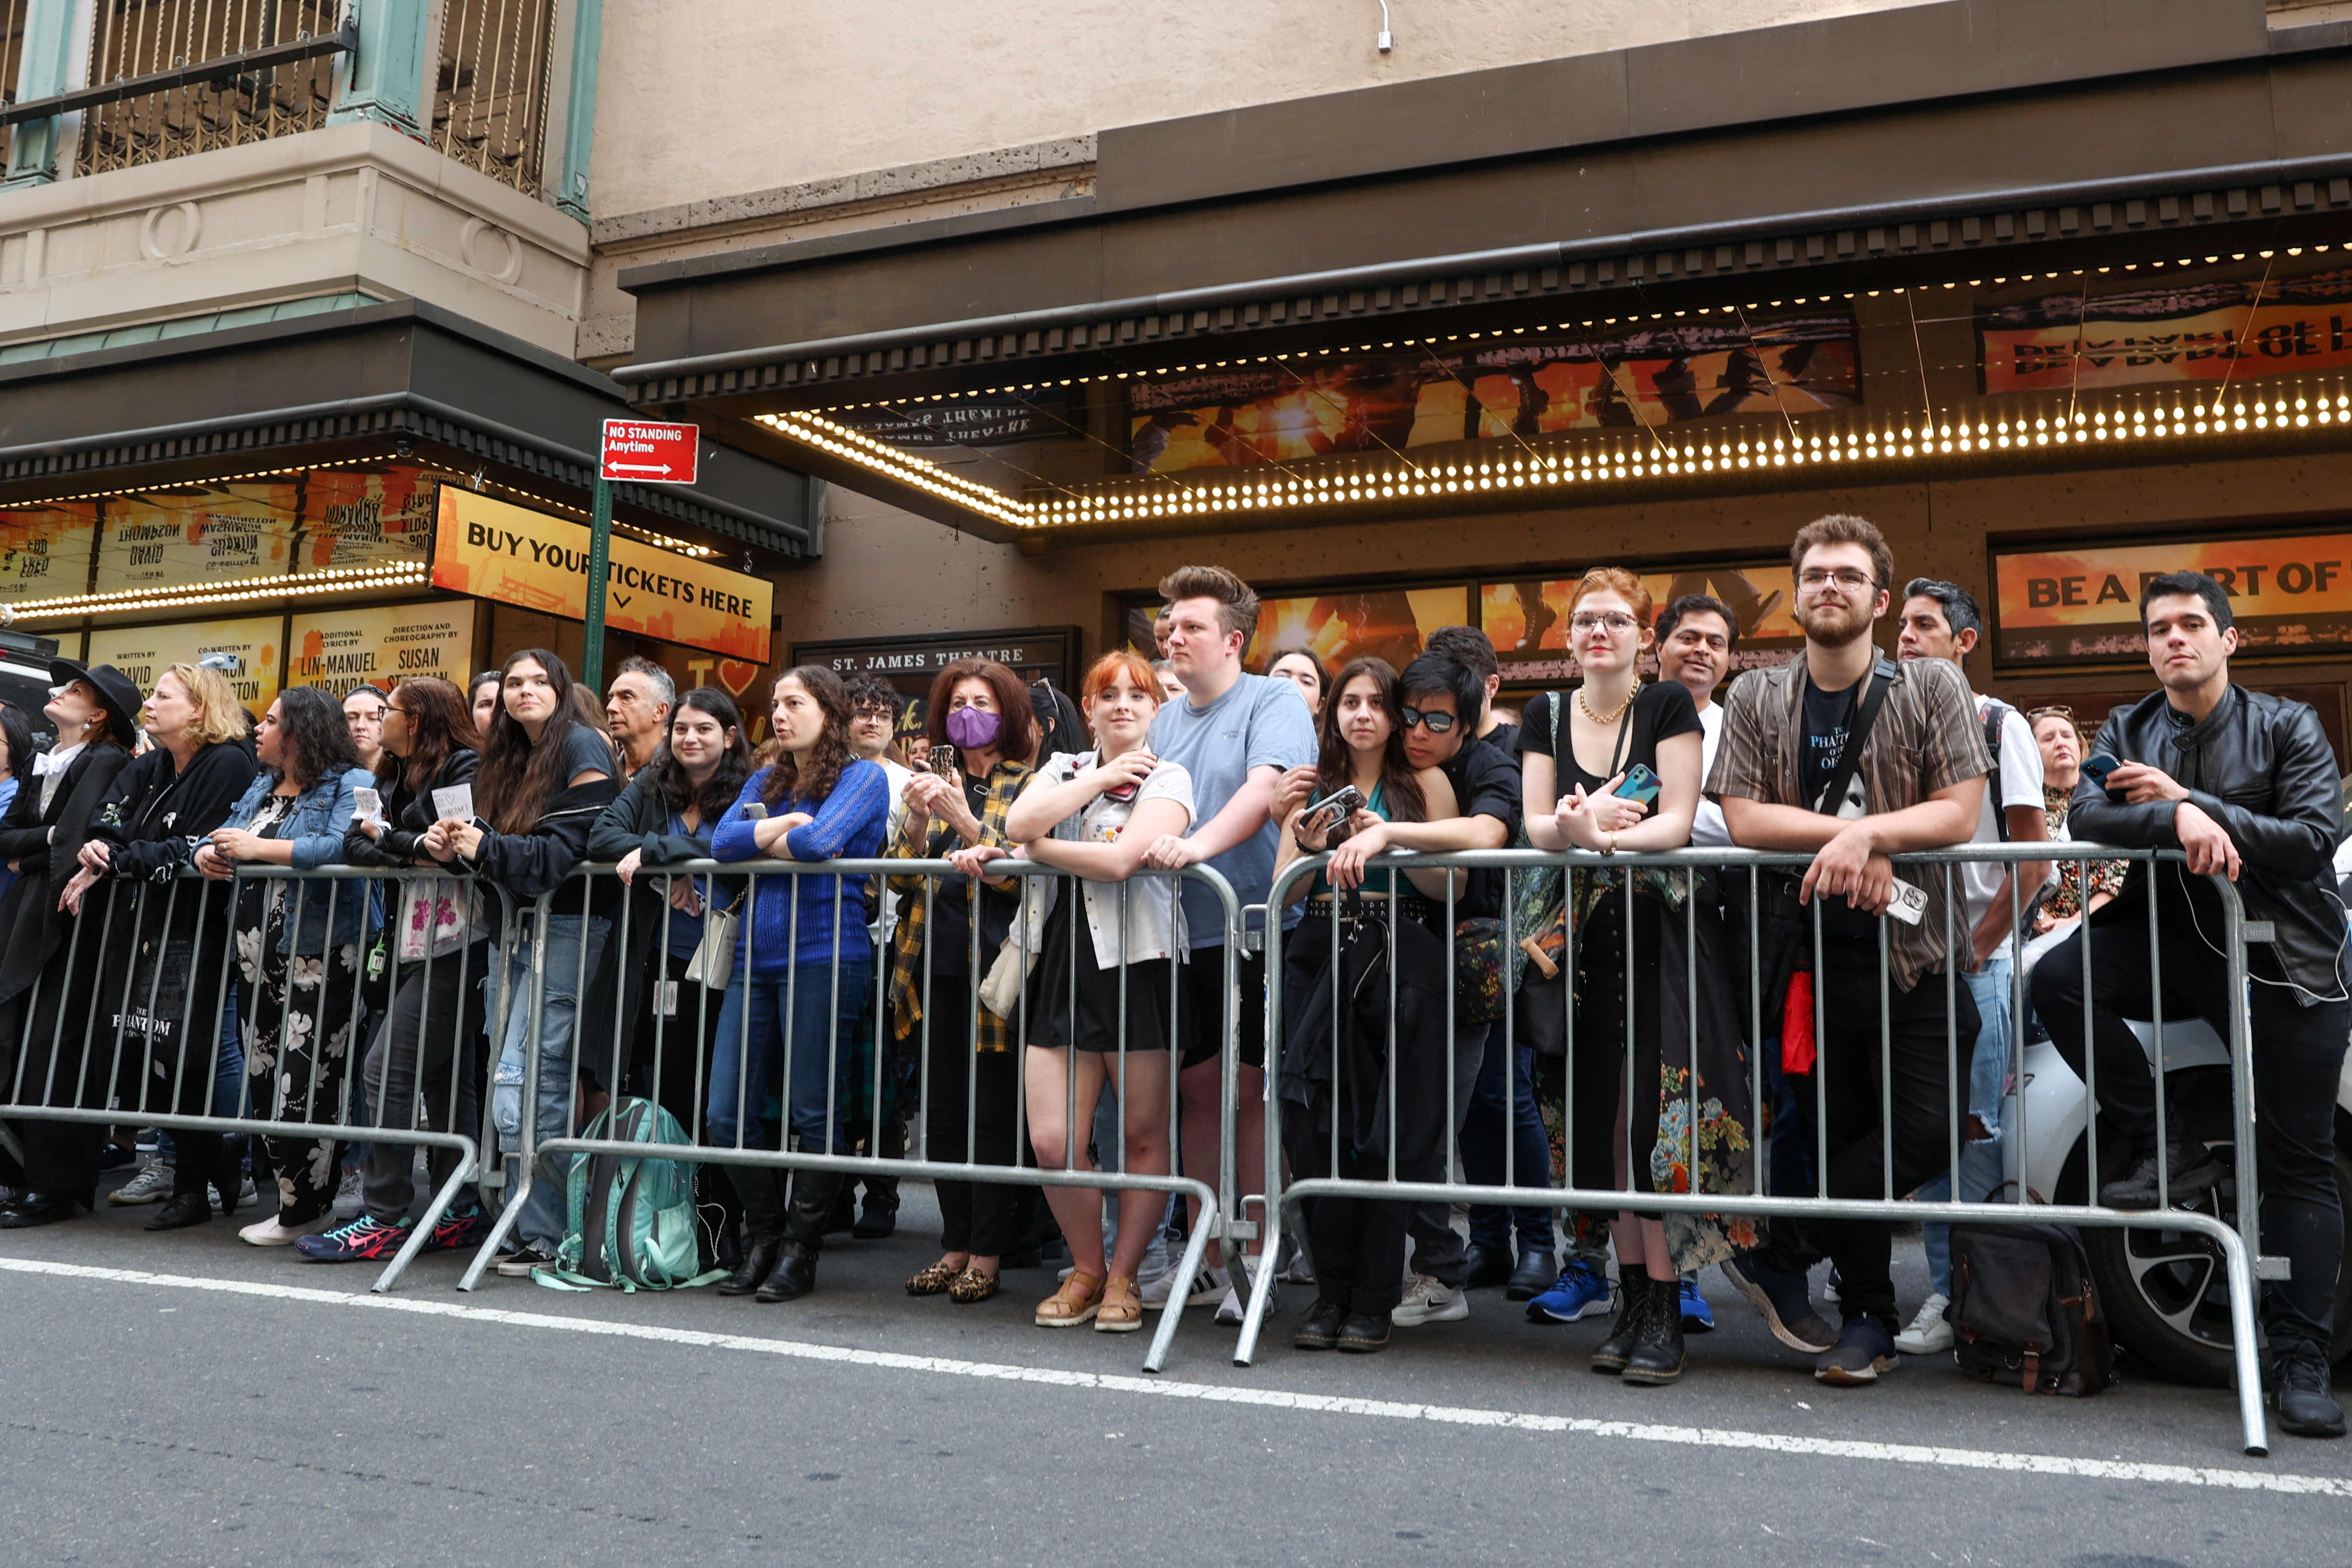 For decades, fans—or “phans,” as they're known—have flocked to Broadway for performances of songs like “Masquerade,” “Angel of Music,” “All I Ask of You” and “The Music of the Night”.  (PHOTO: REUTERS/Caitlin Ochs)